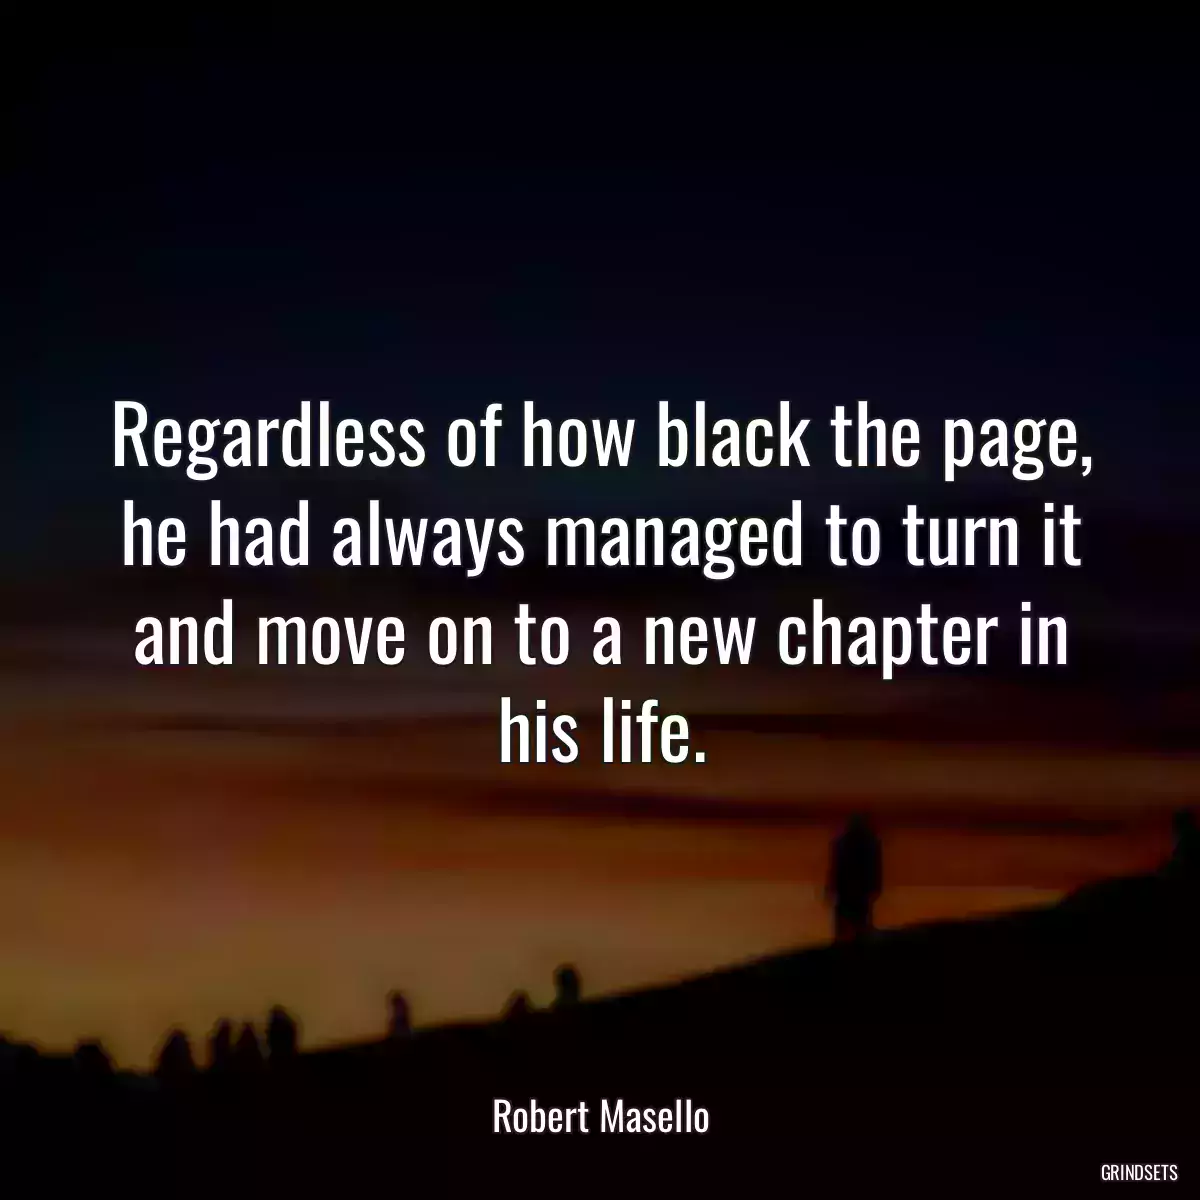 Regardless of how black the page, he had always managed to turn it and move on to a new chapter in his life.